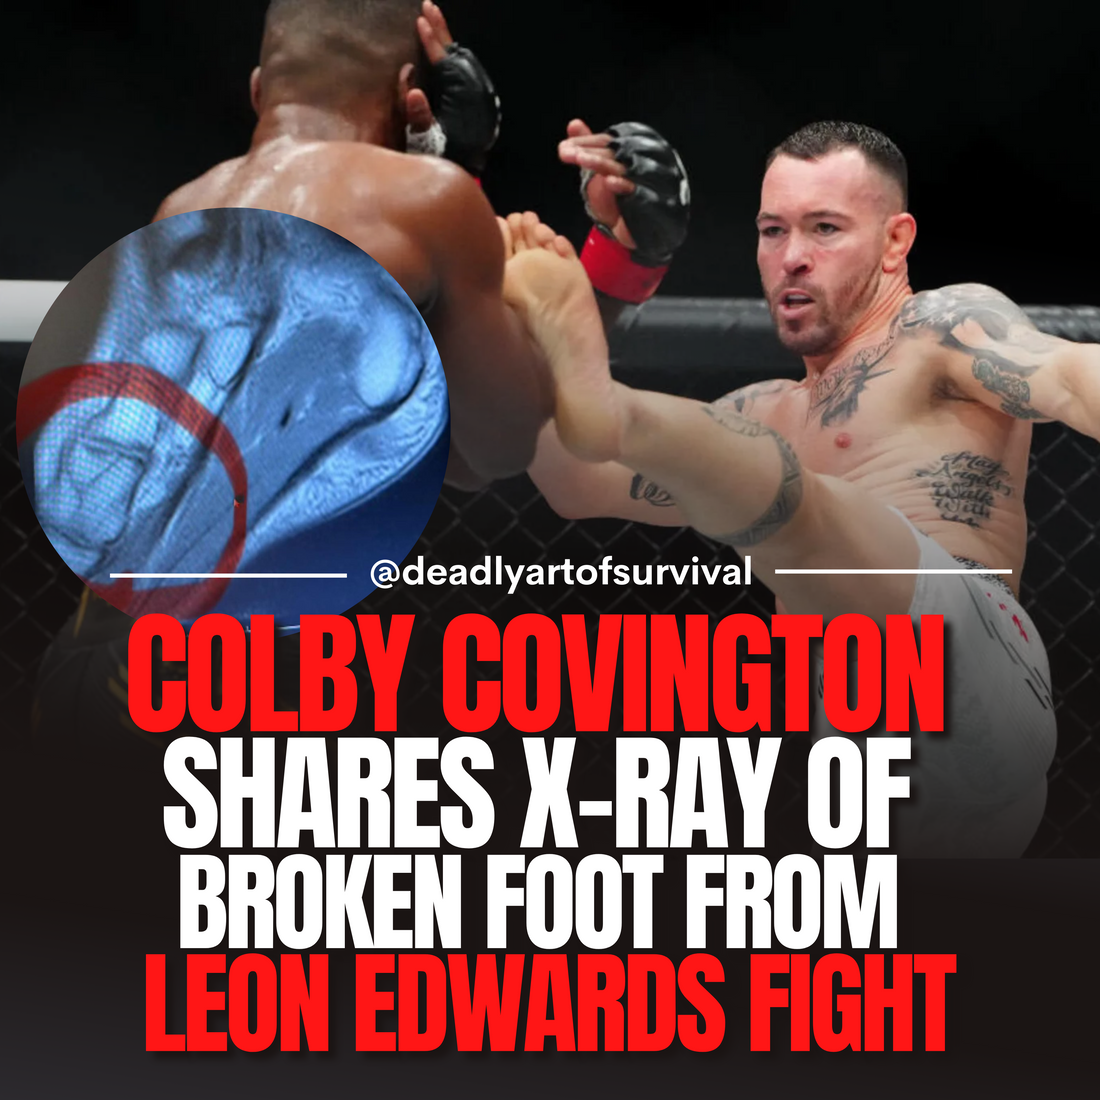 Colby-Covington-Reveals-X-Ray-Of-His-Broken-Foot-Blaming-It-For-His-Loss-To-Leon-Edwards deadlyartofsurvival.com